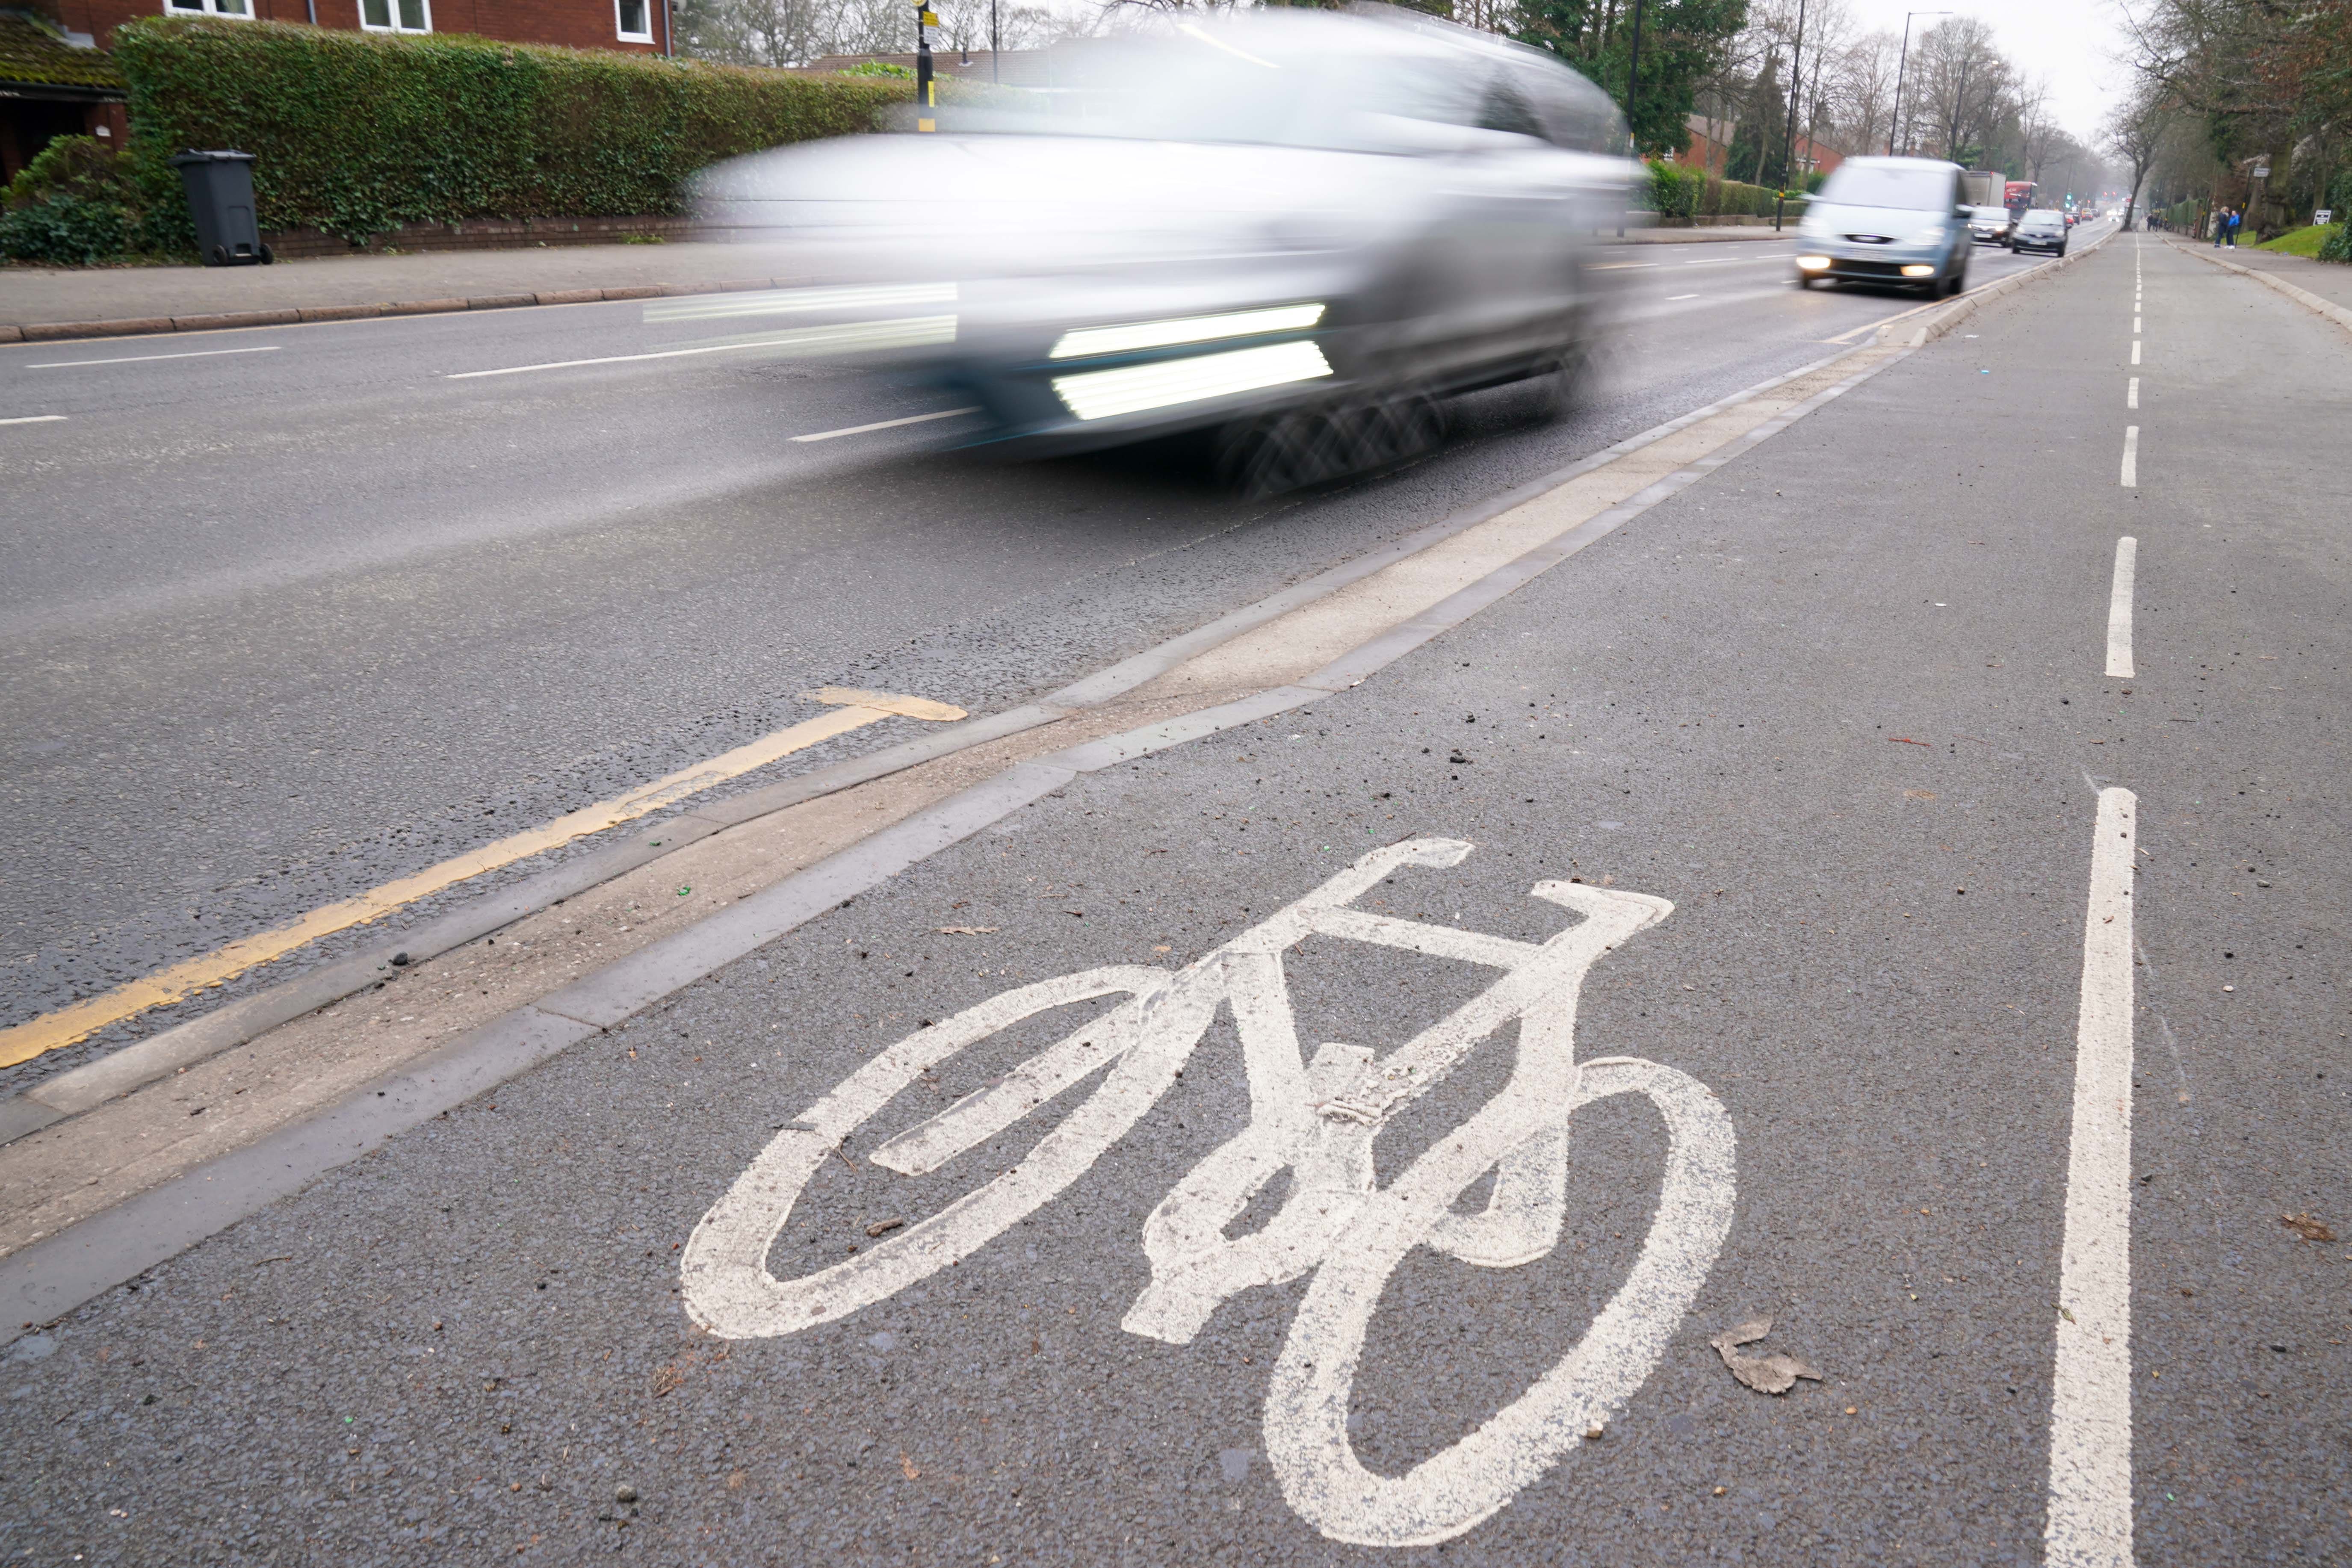 The Department for Transport (DfT) “does not yet know” if local authority projects like cycle lanes and low traffic neighbourhoods “have been of good enough quality”